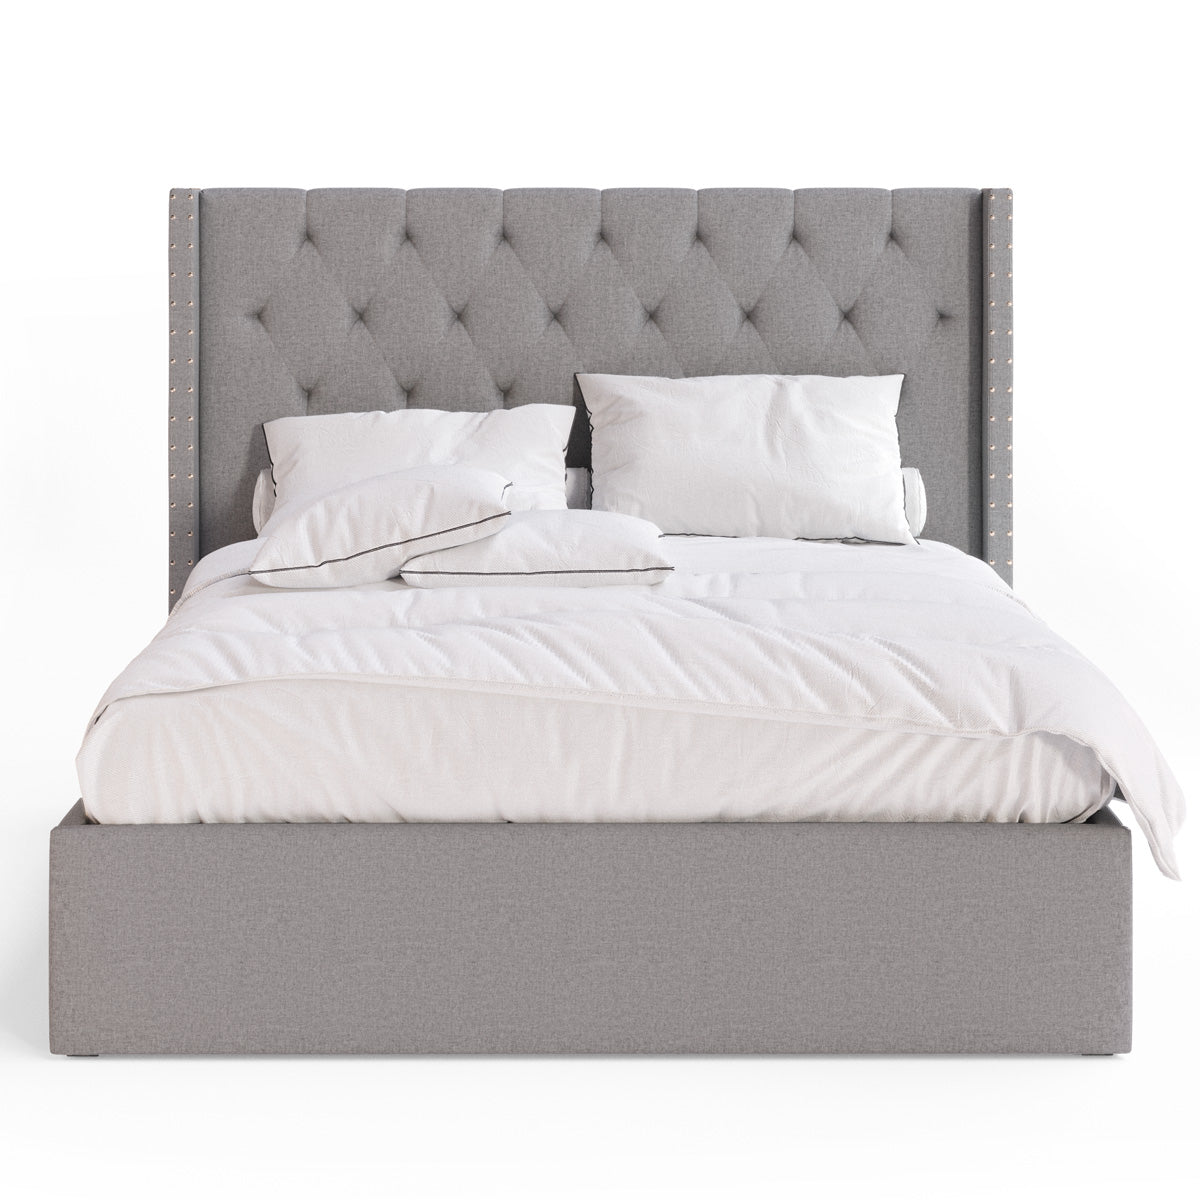 Leonora Gas Lift Storage Wing Bed Frame with Studs (Grey Fabric)